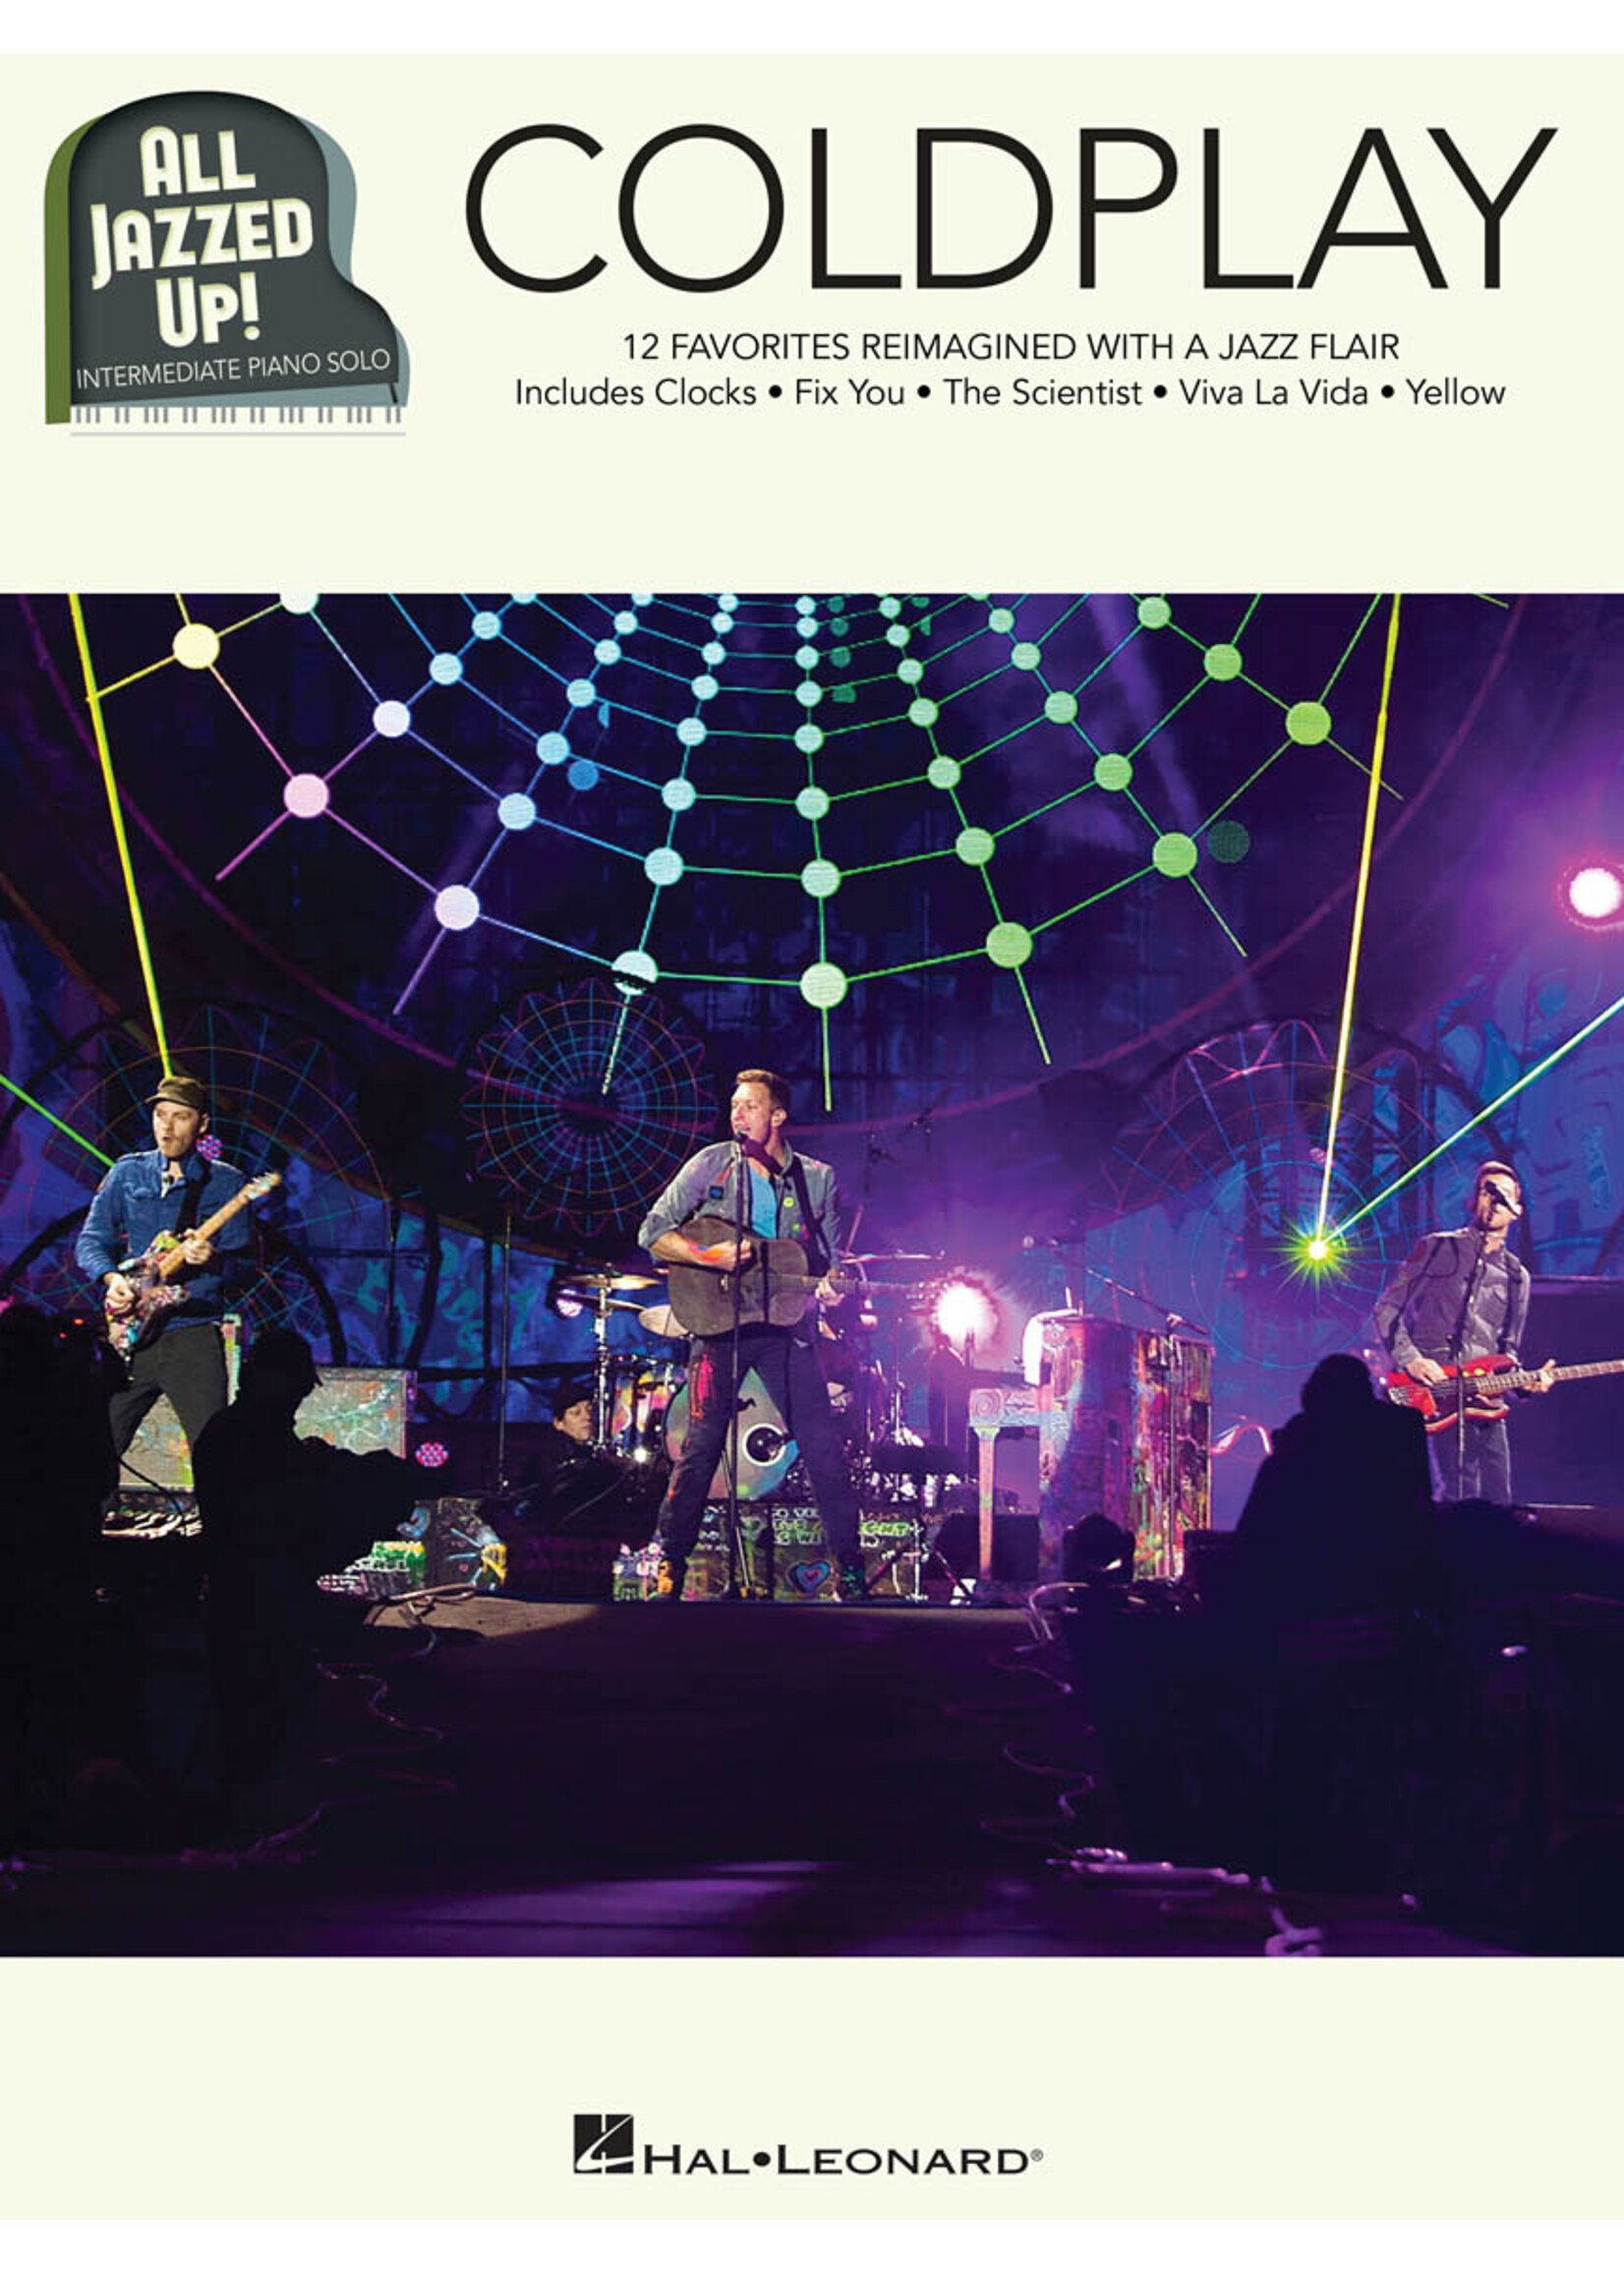 Hal Leonard Coldplay All Jazzed Up!